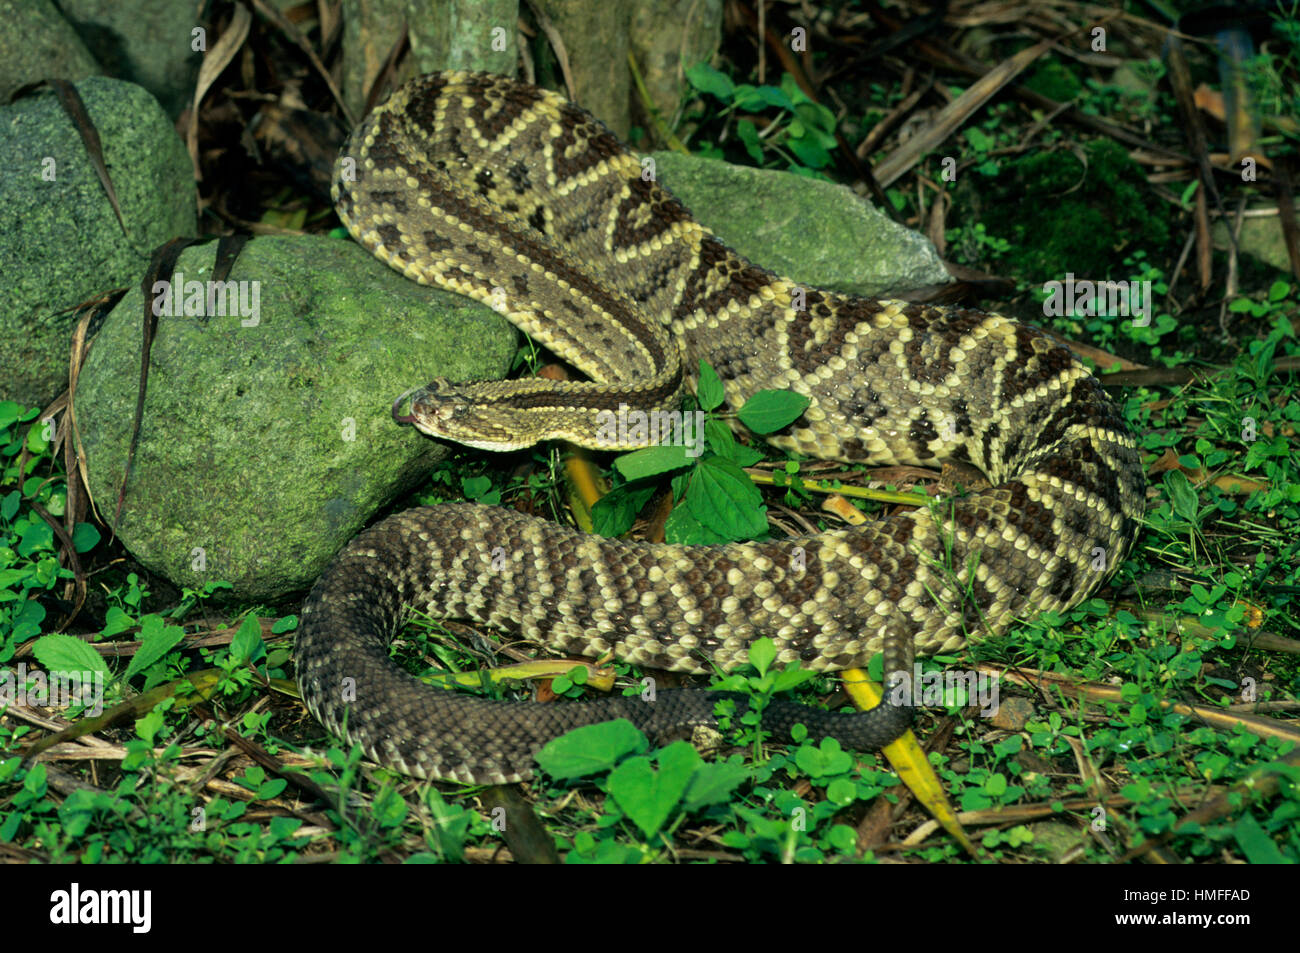 Tropical Rattlesnake (Crotalus durissus), Costa Rica Stock Photo